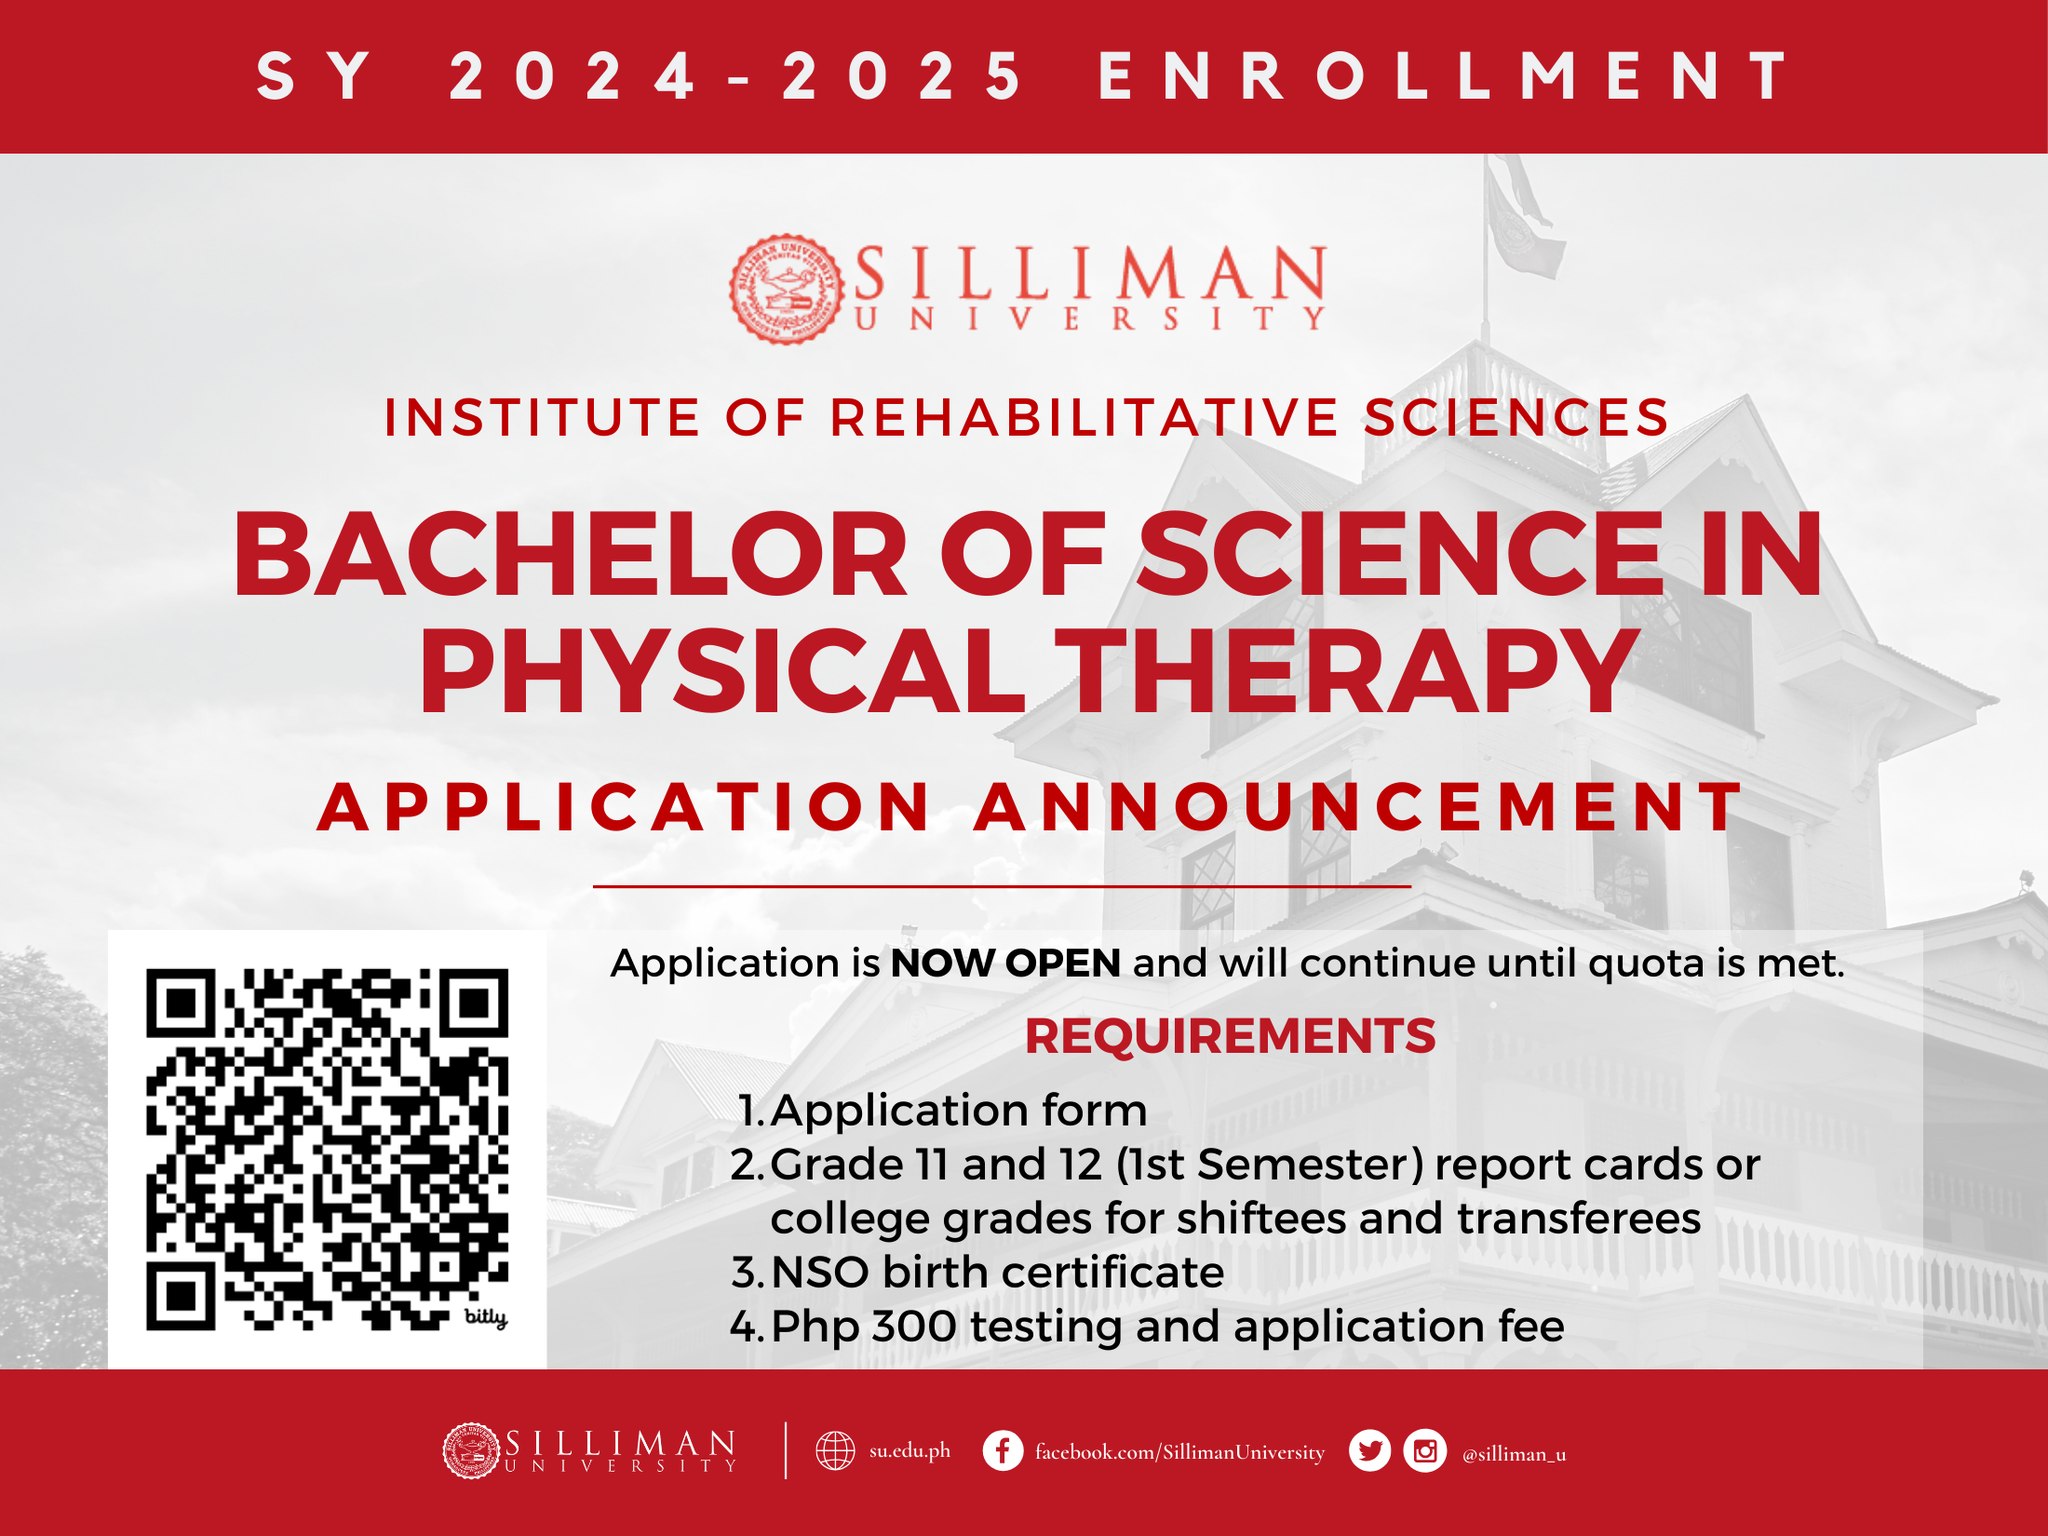 The Silliman University (SU) Institute of Rehabilitative Sciences (IRS) is NOW ACCEPTING applicants for the First Semester, SY 2024-2025